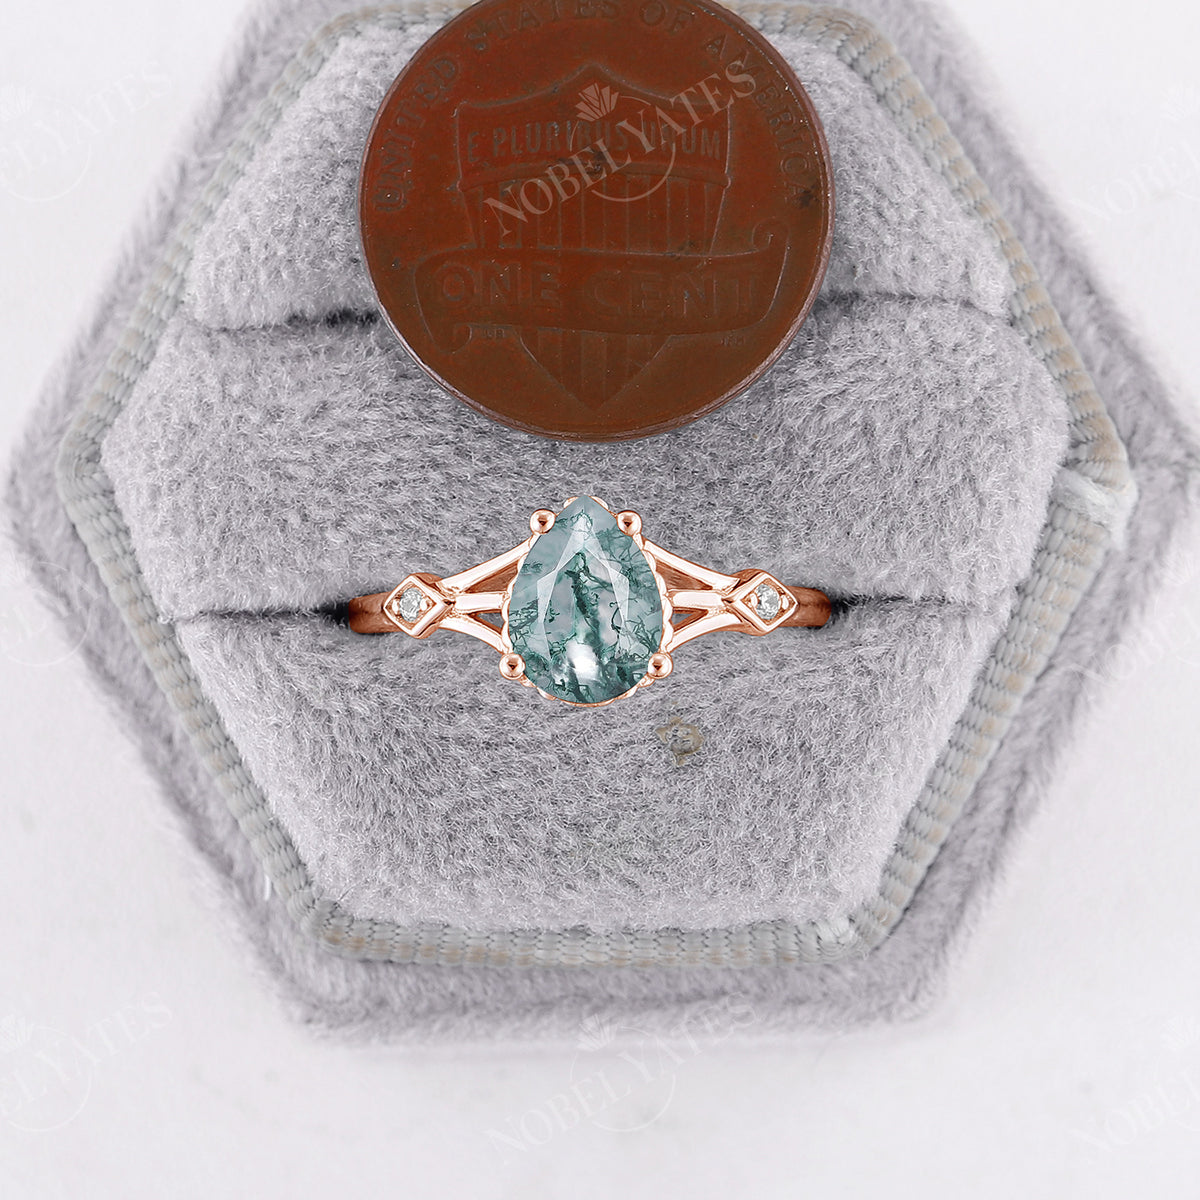 Unique Split Moss Agate Engagement Ring Rose Gold Band